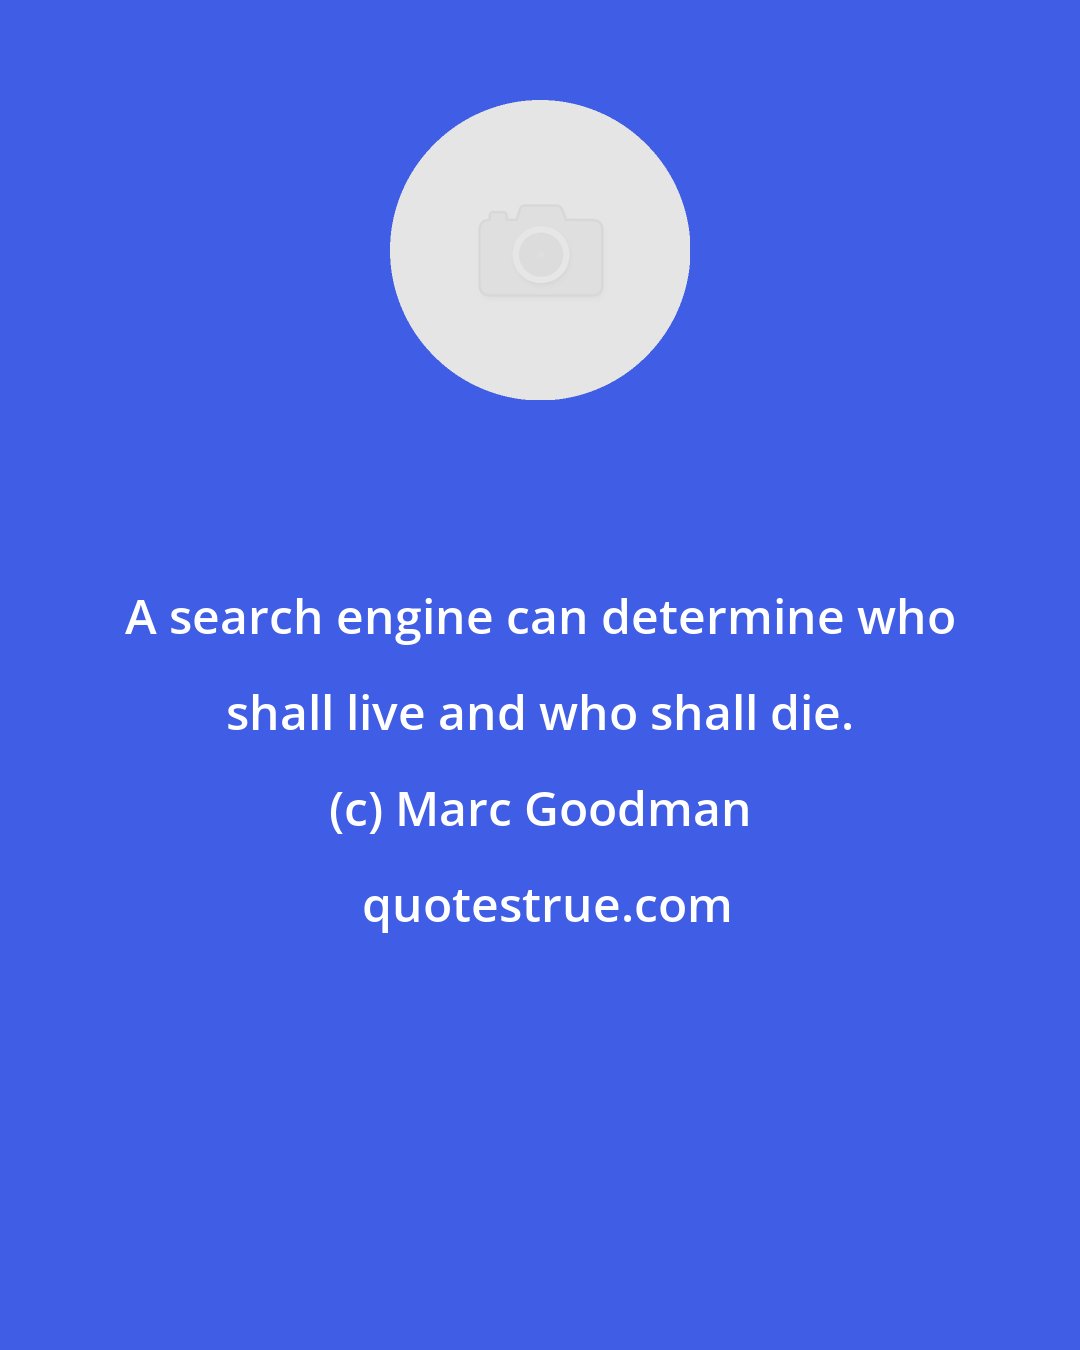 Marc Goodman: A search engine can determine who shall live and who shall die.